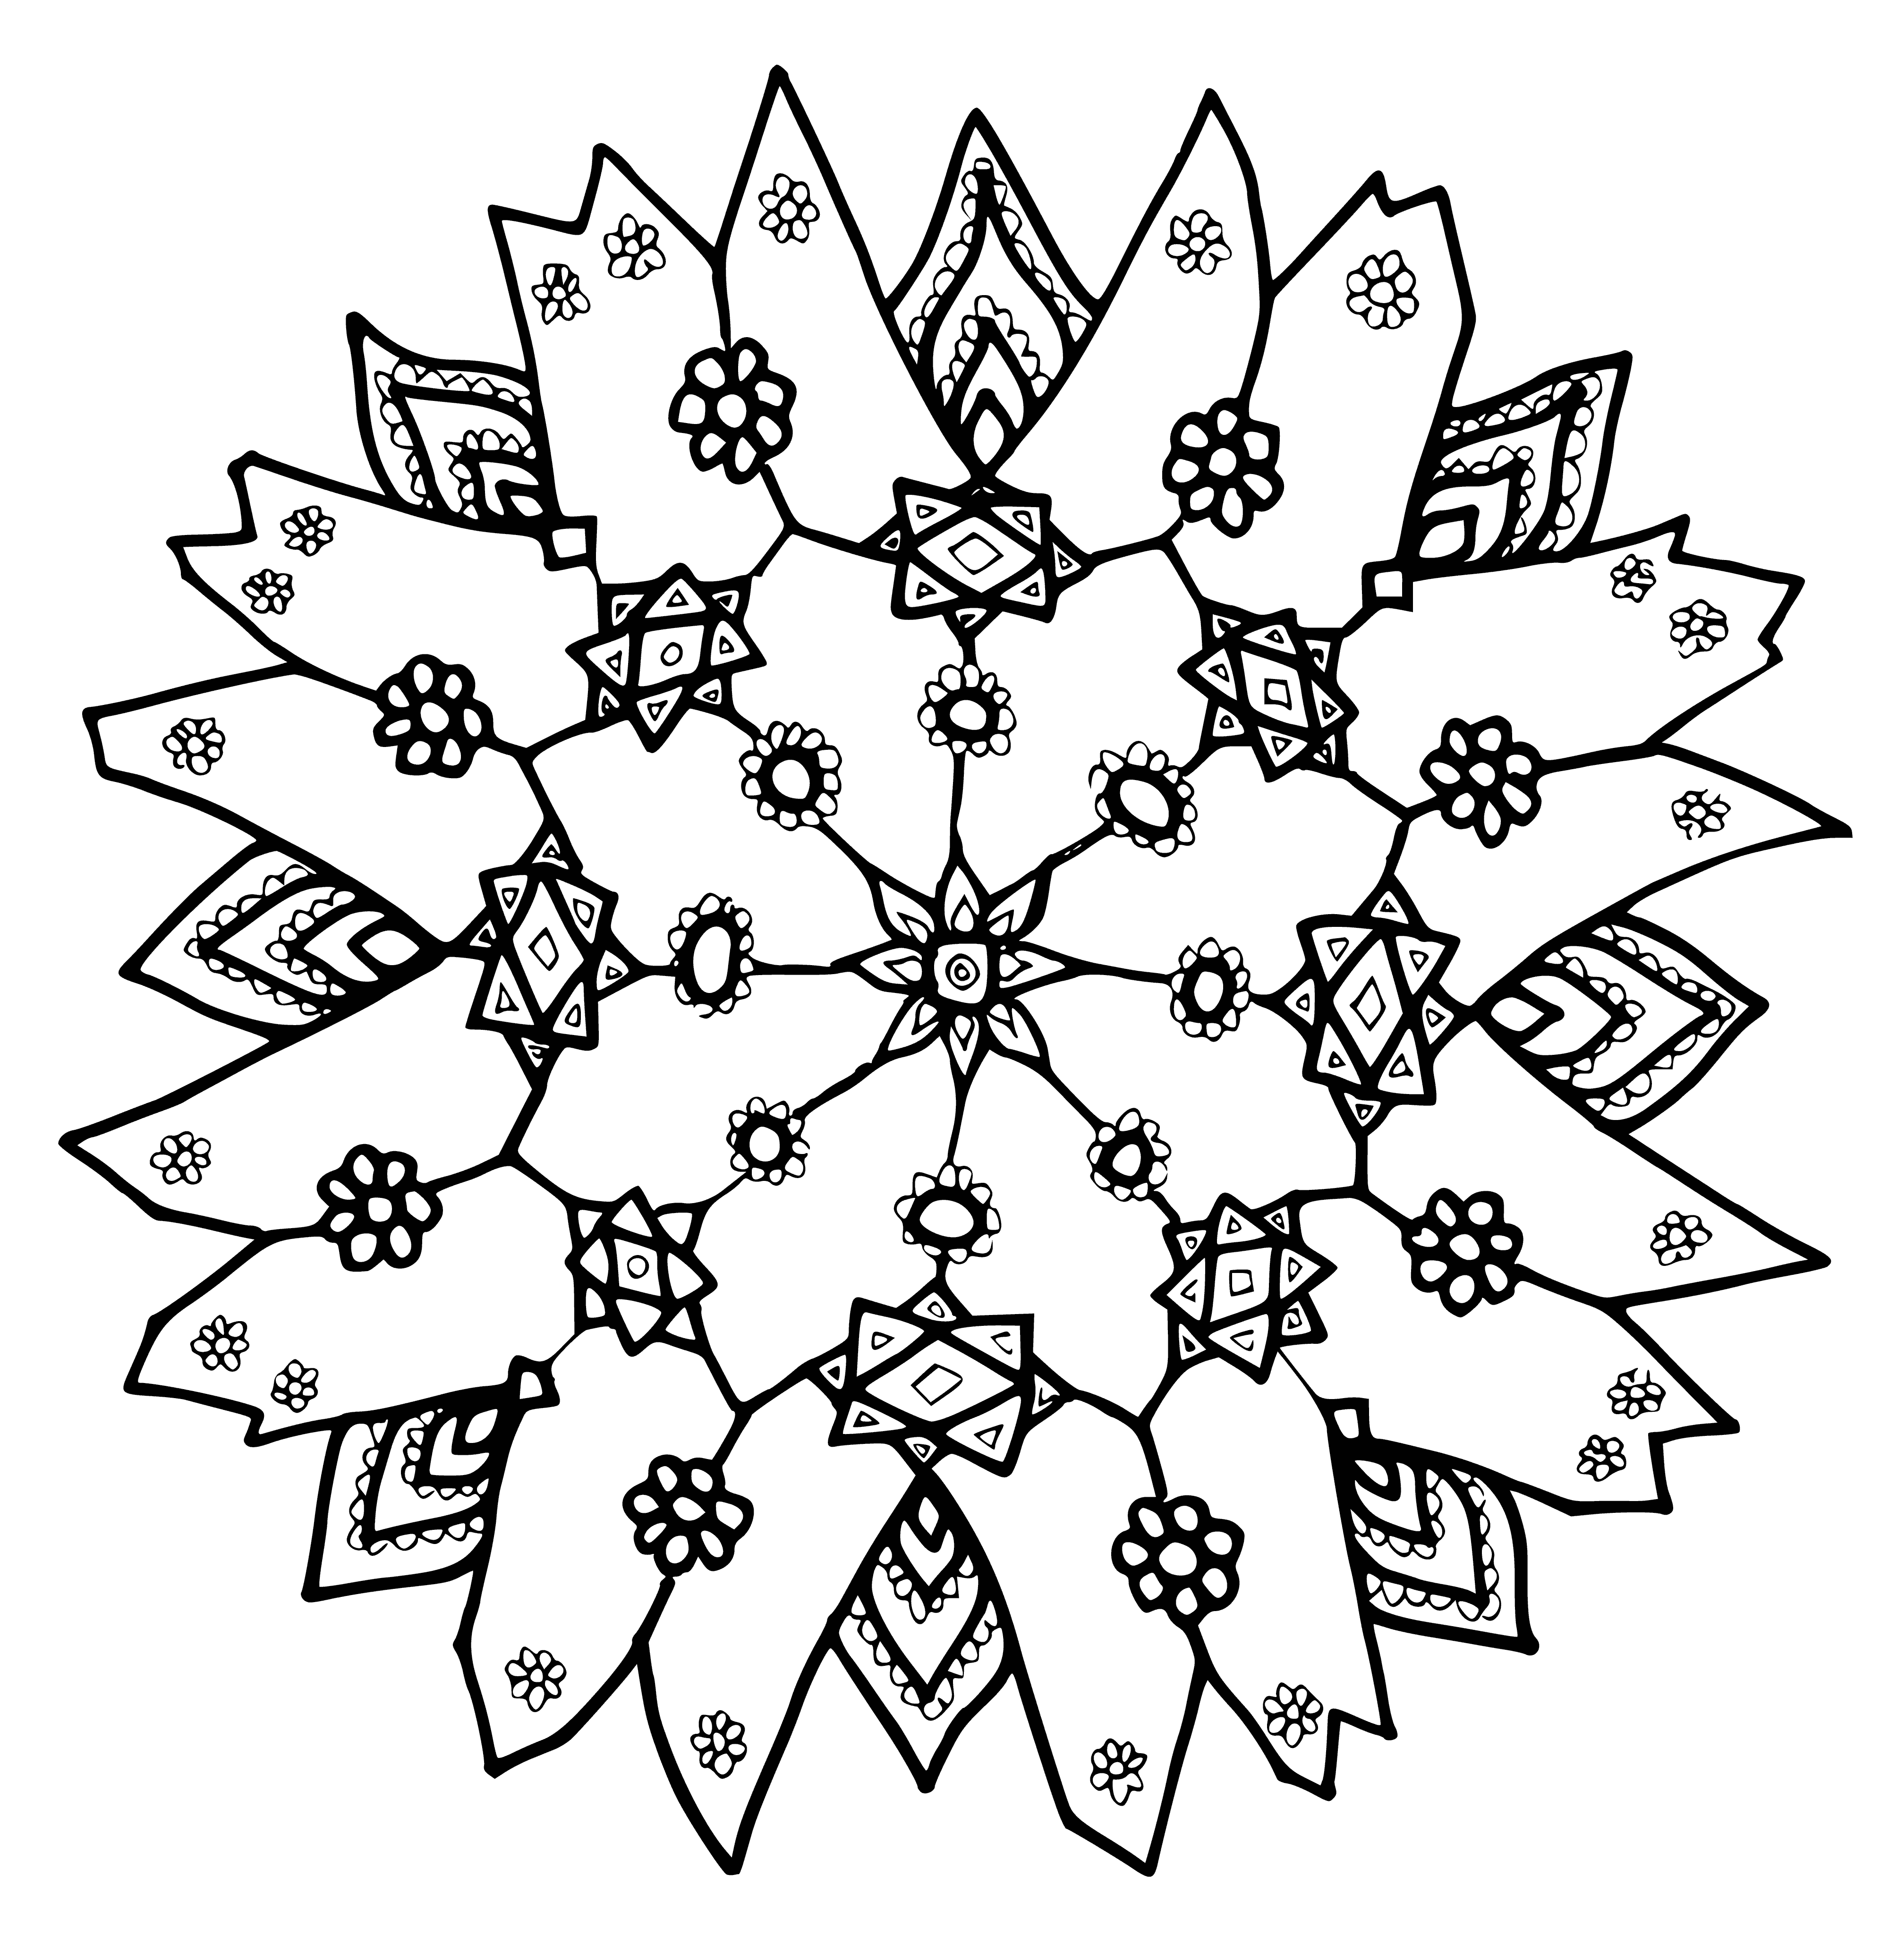 A coloring page of a white, symmetrical snowflake with six sides, intricate and beautiful.